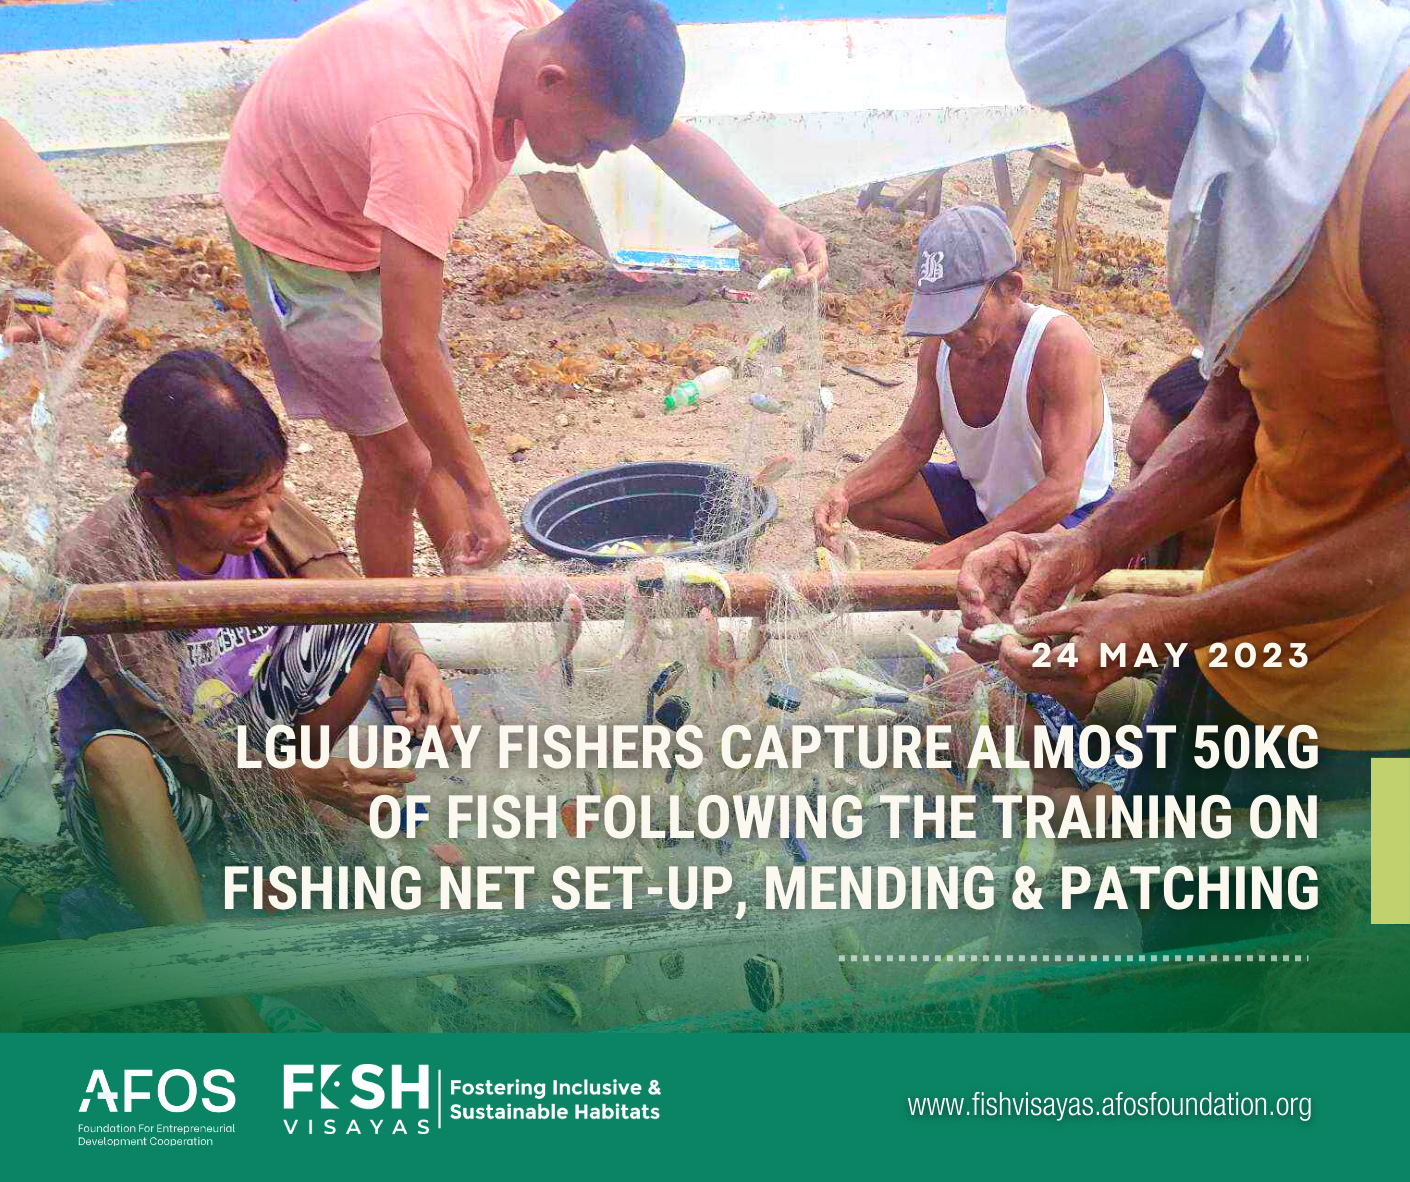 LGU Ubay Fishers Capture Almost 50kg of Fish Following the